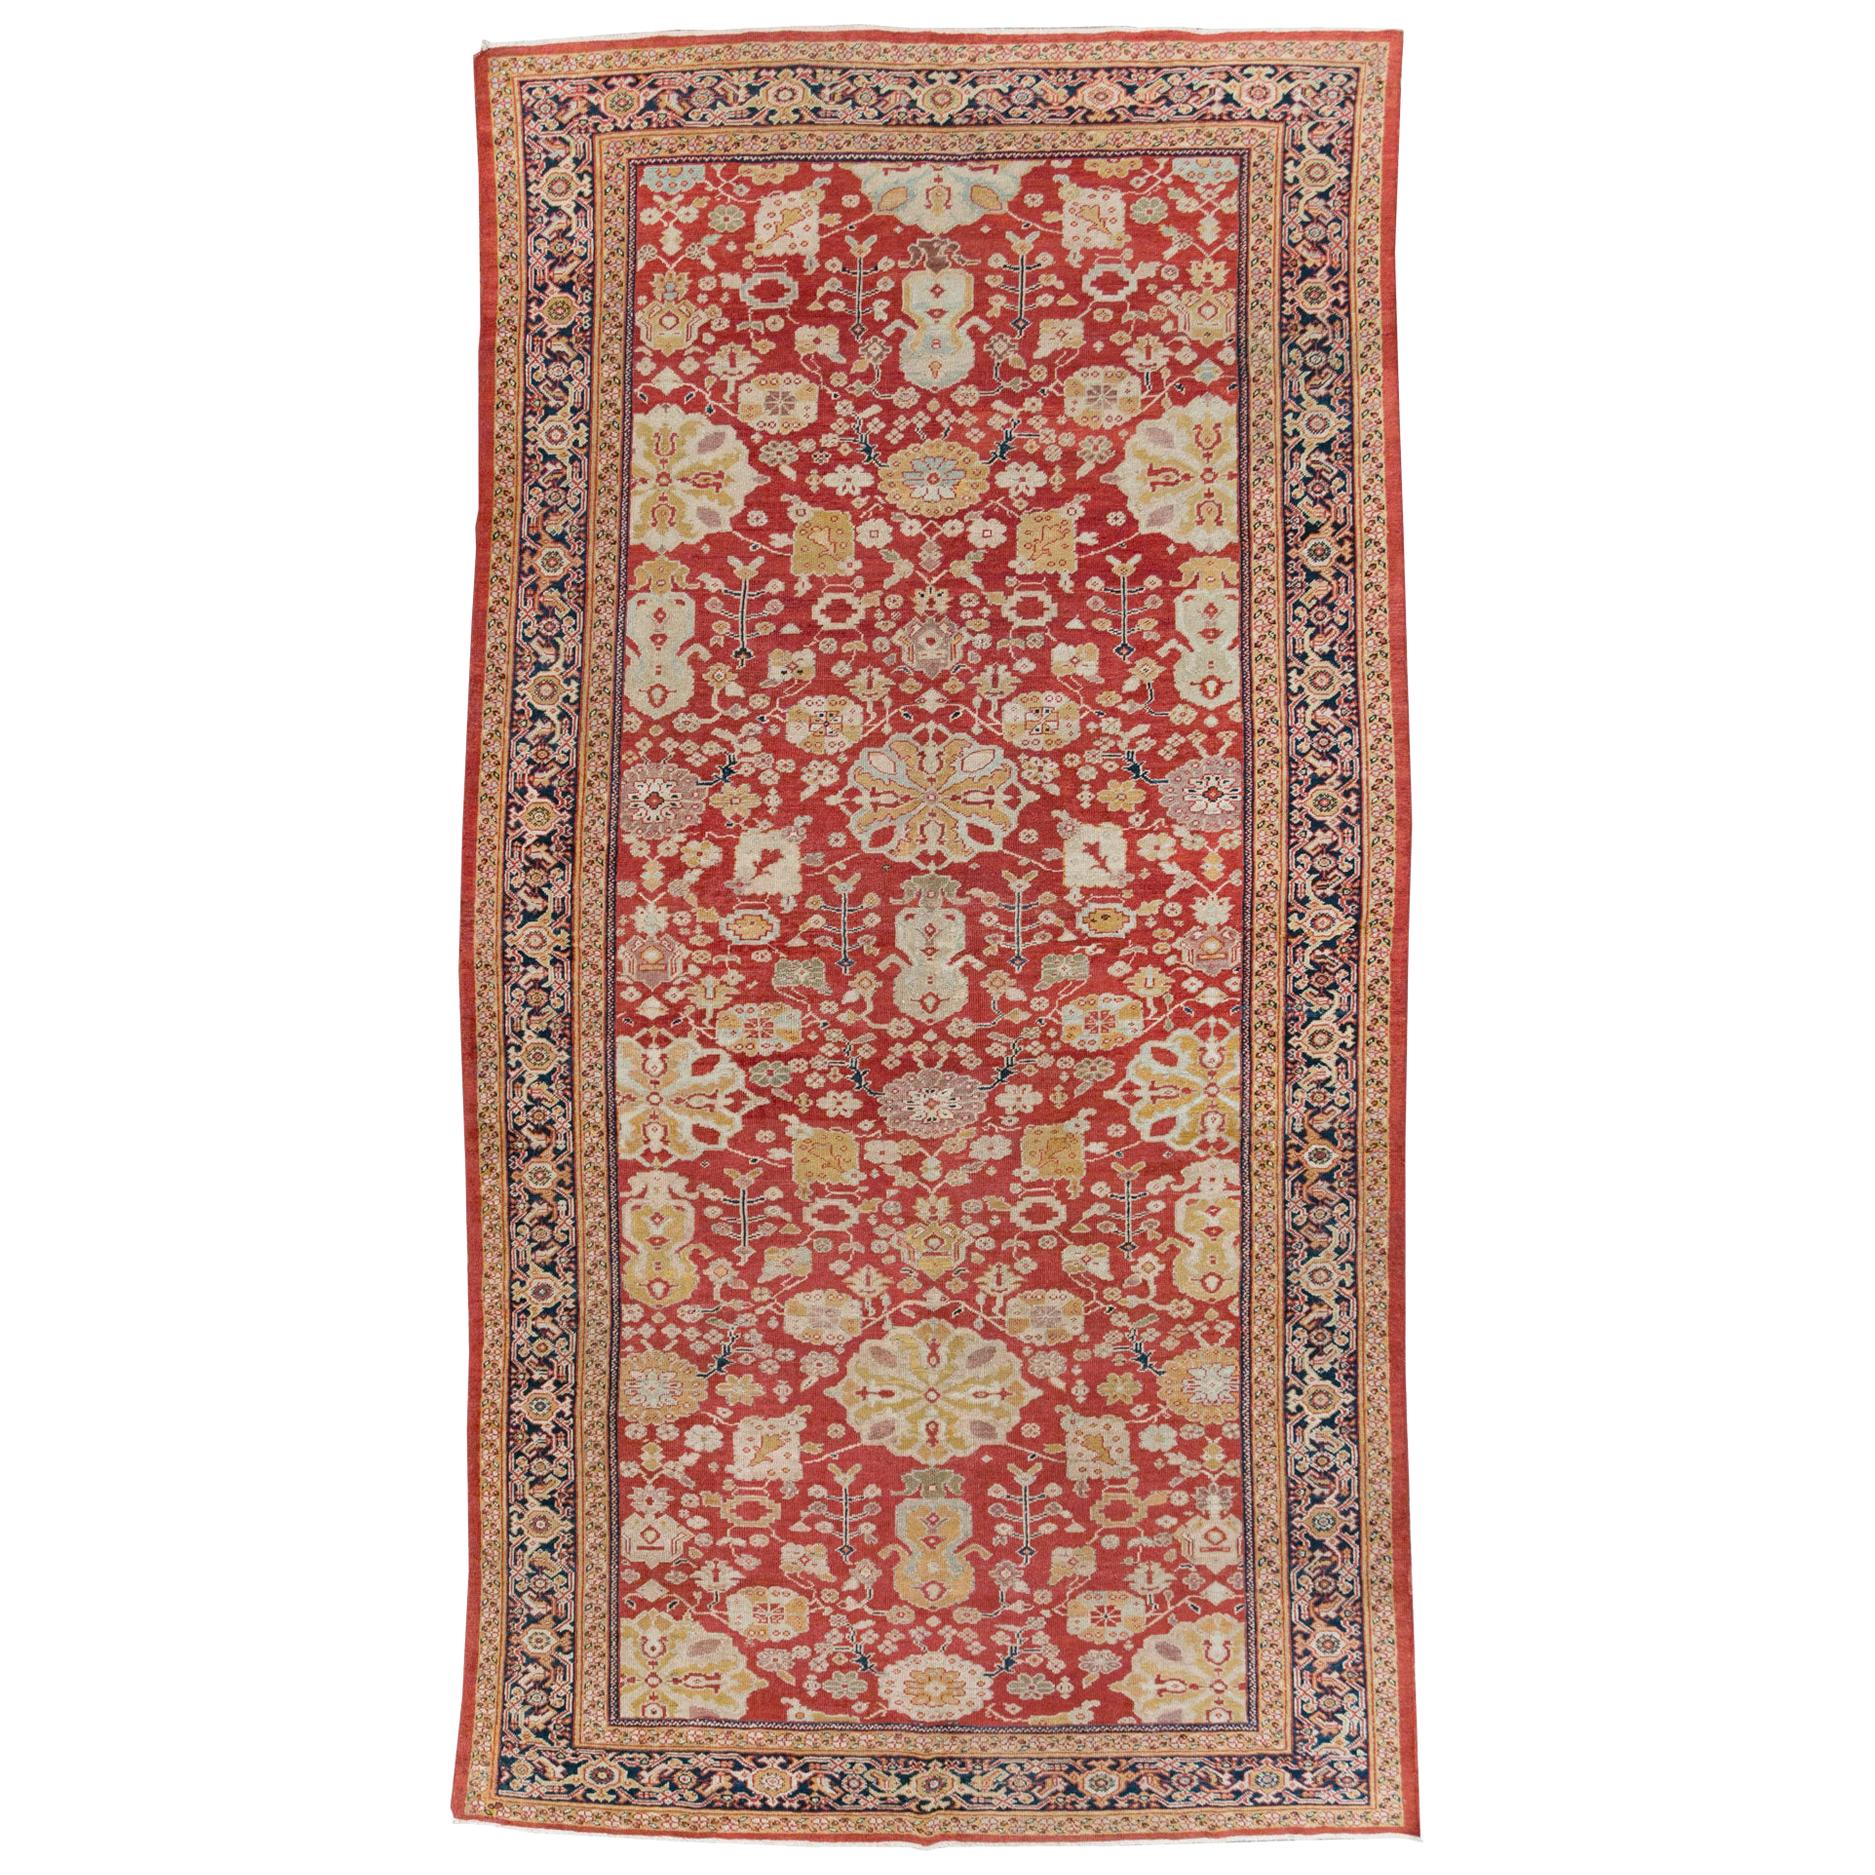 Early 20th Century Handmade Persian Sultanabad Long and Narrow Gallery Carpet